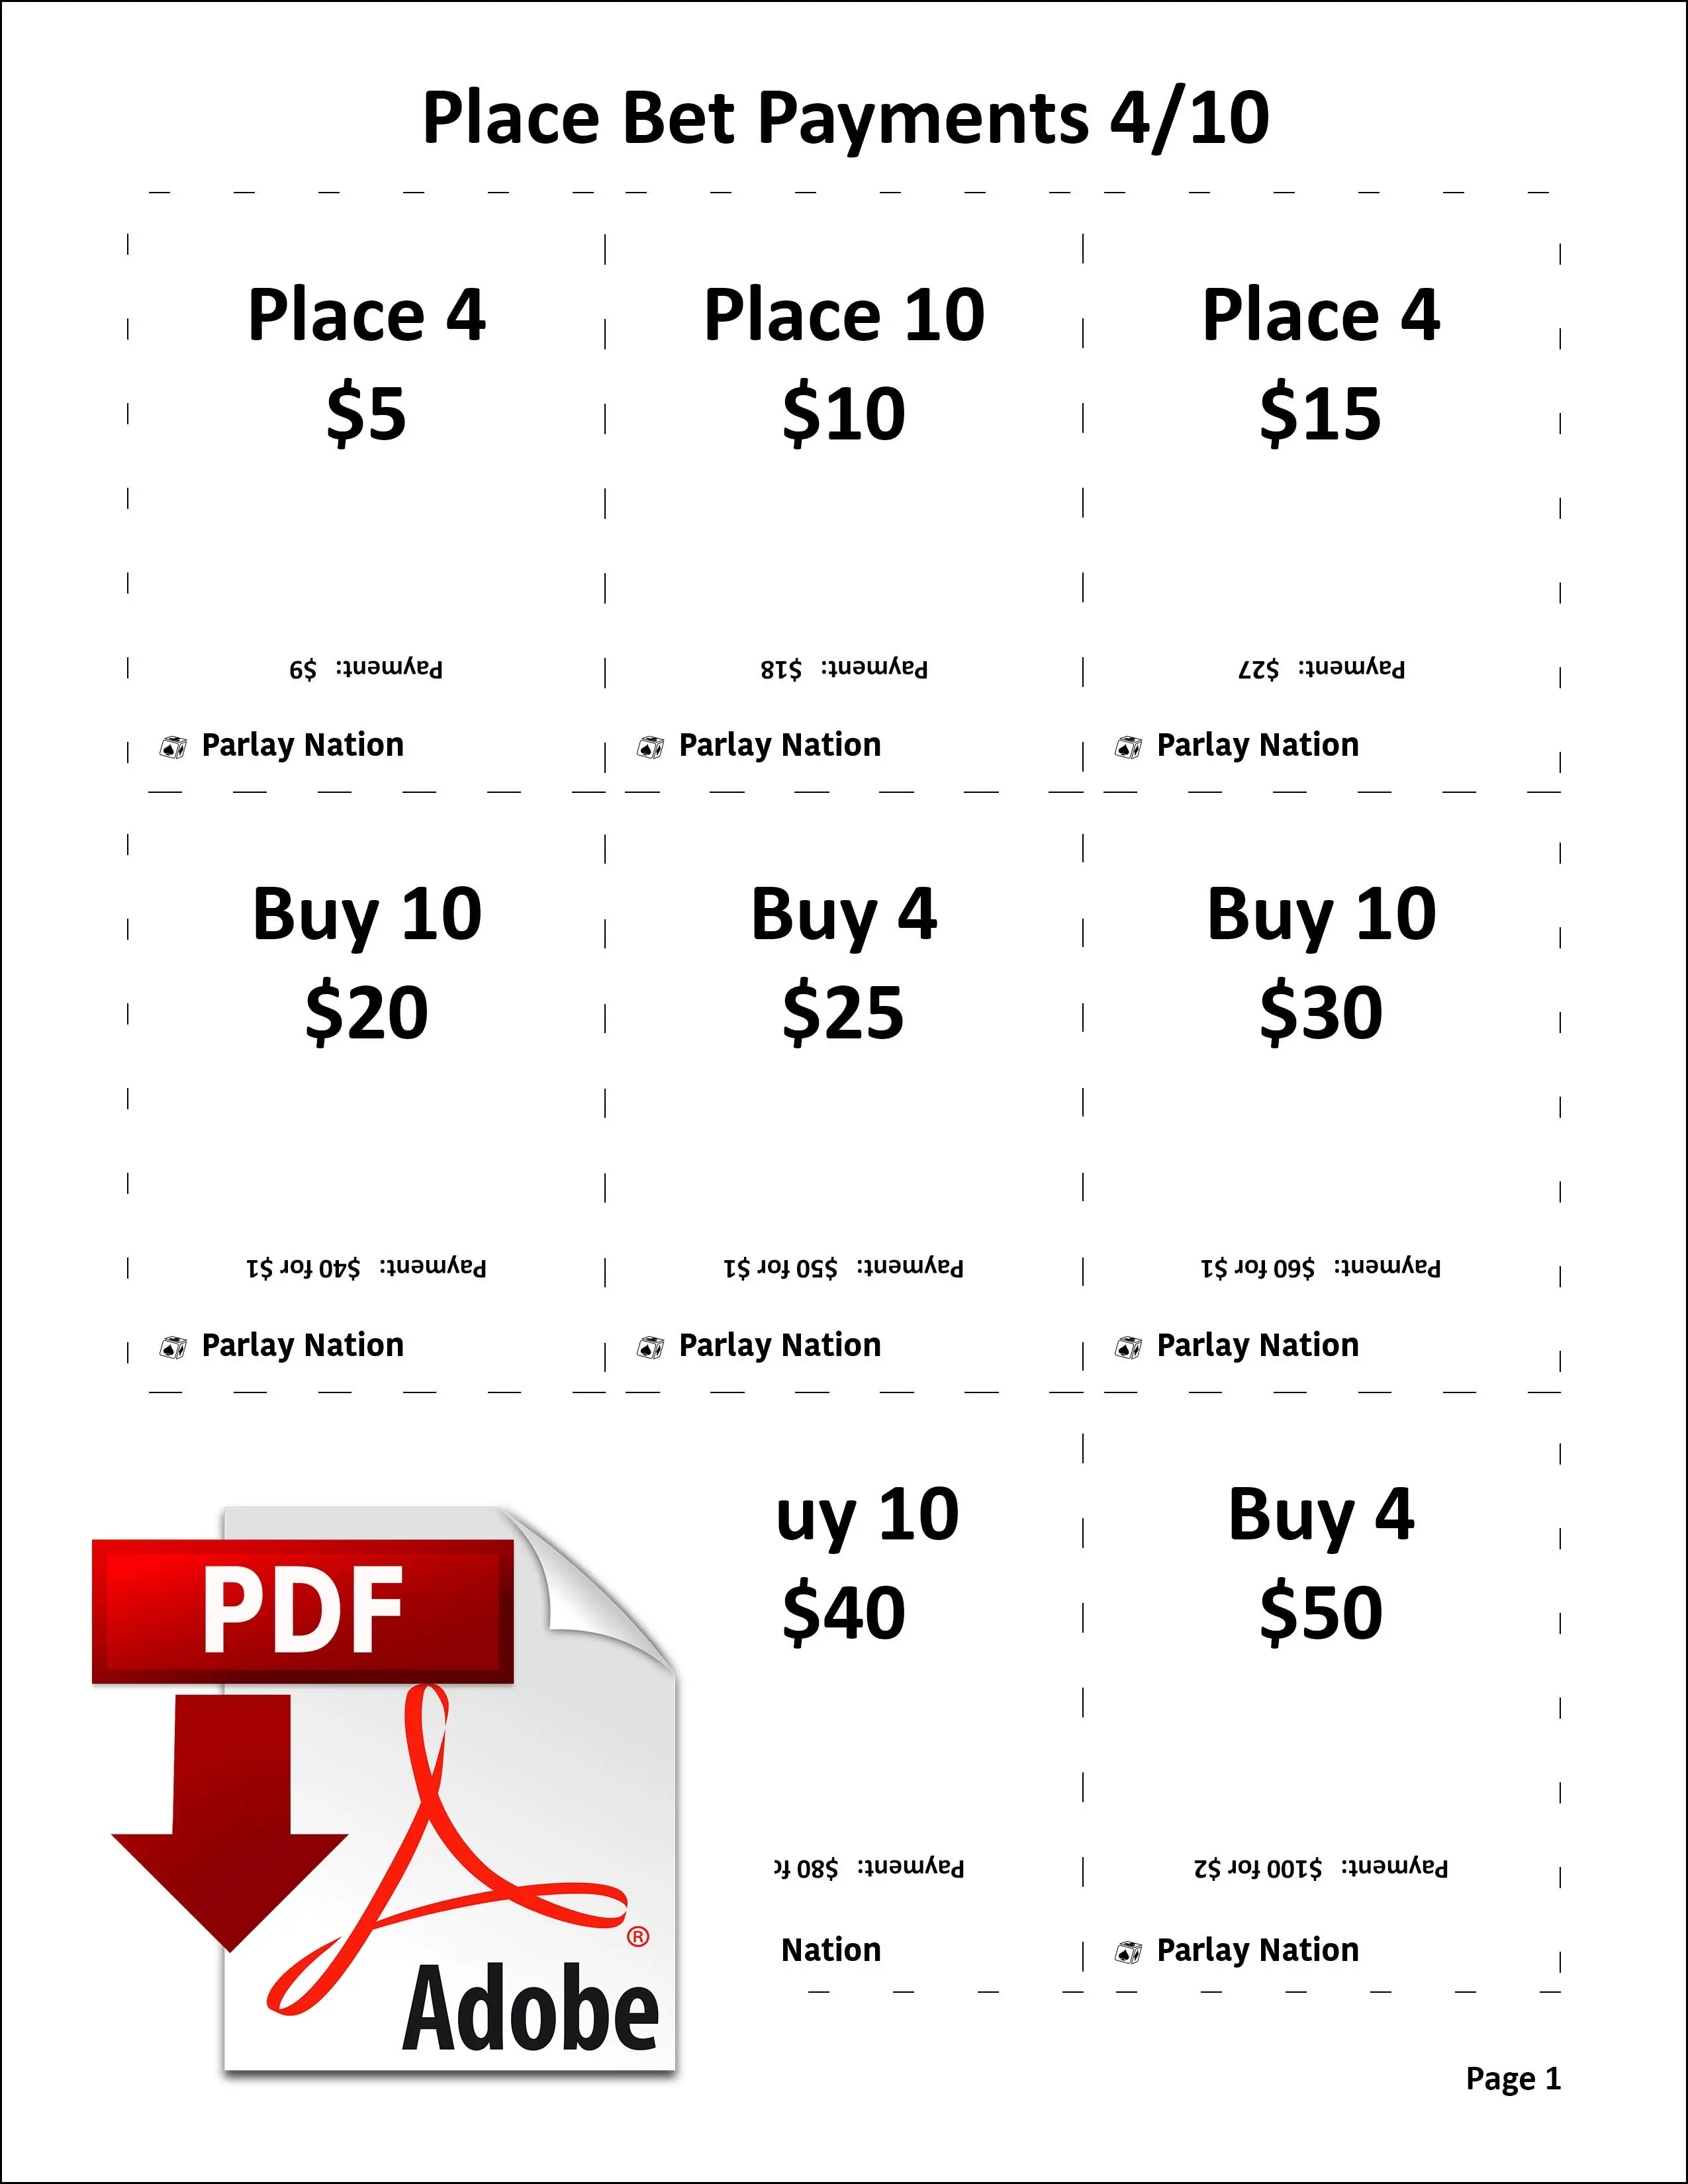 Place Bet Payments 4 & 10 cover sheet.